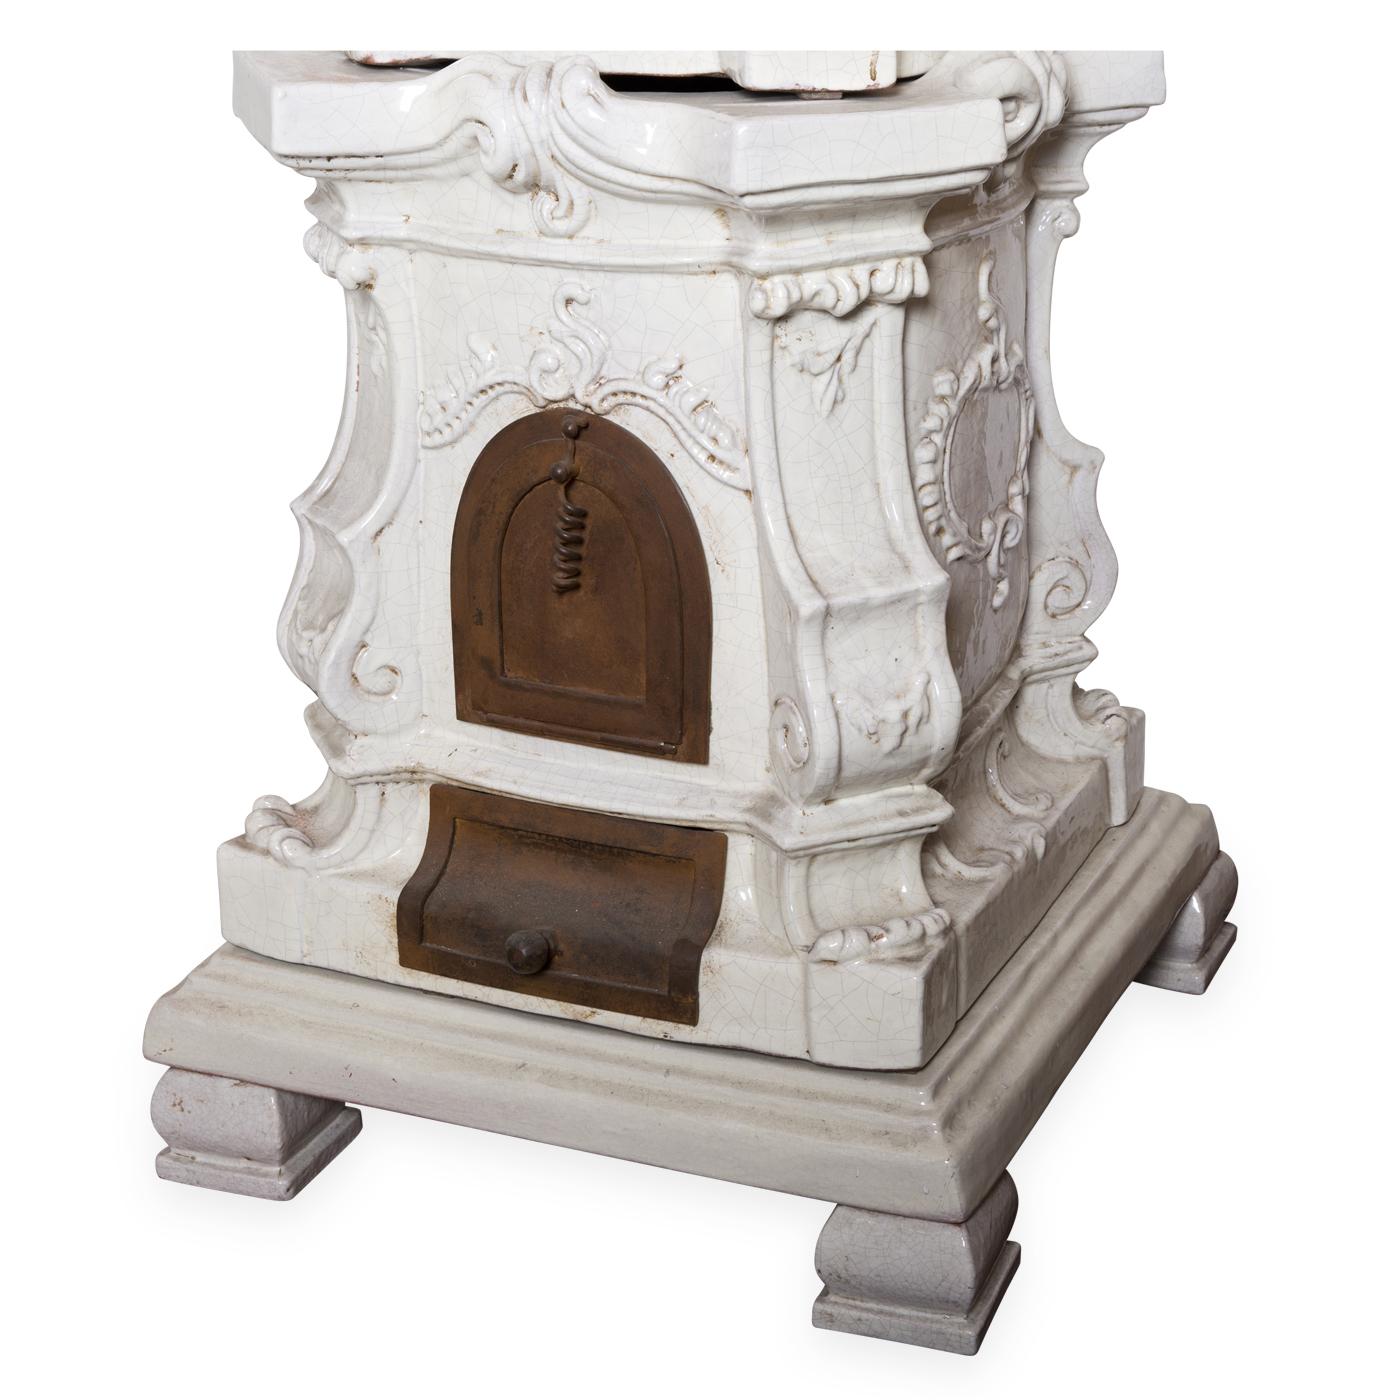 A smaller version of the Venetian baroque stove in elegant white ceramic, entirely handcrafted by the master ceramists of Manetti and Masini. The stove is made in genuine tin glaze and decorated following time-honored maiolica